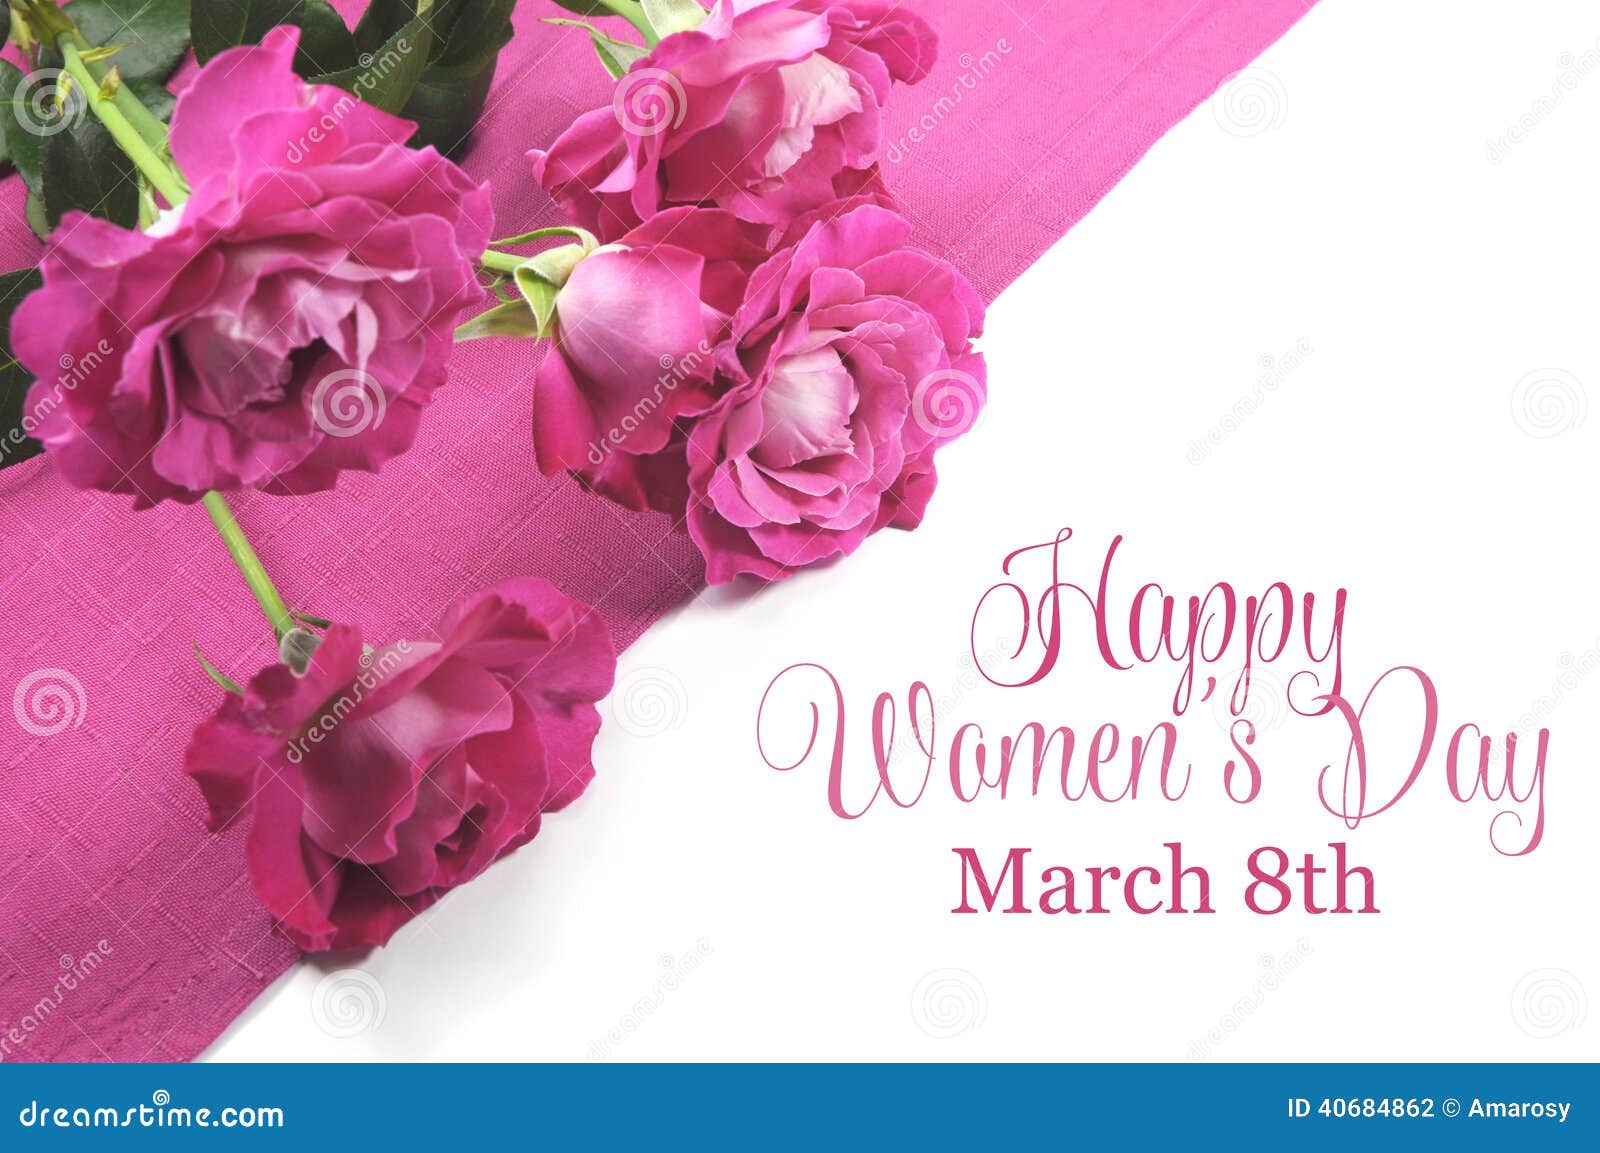 Happy International Womens Day, March 8, roses and text